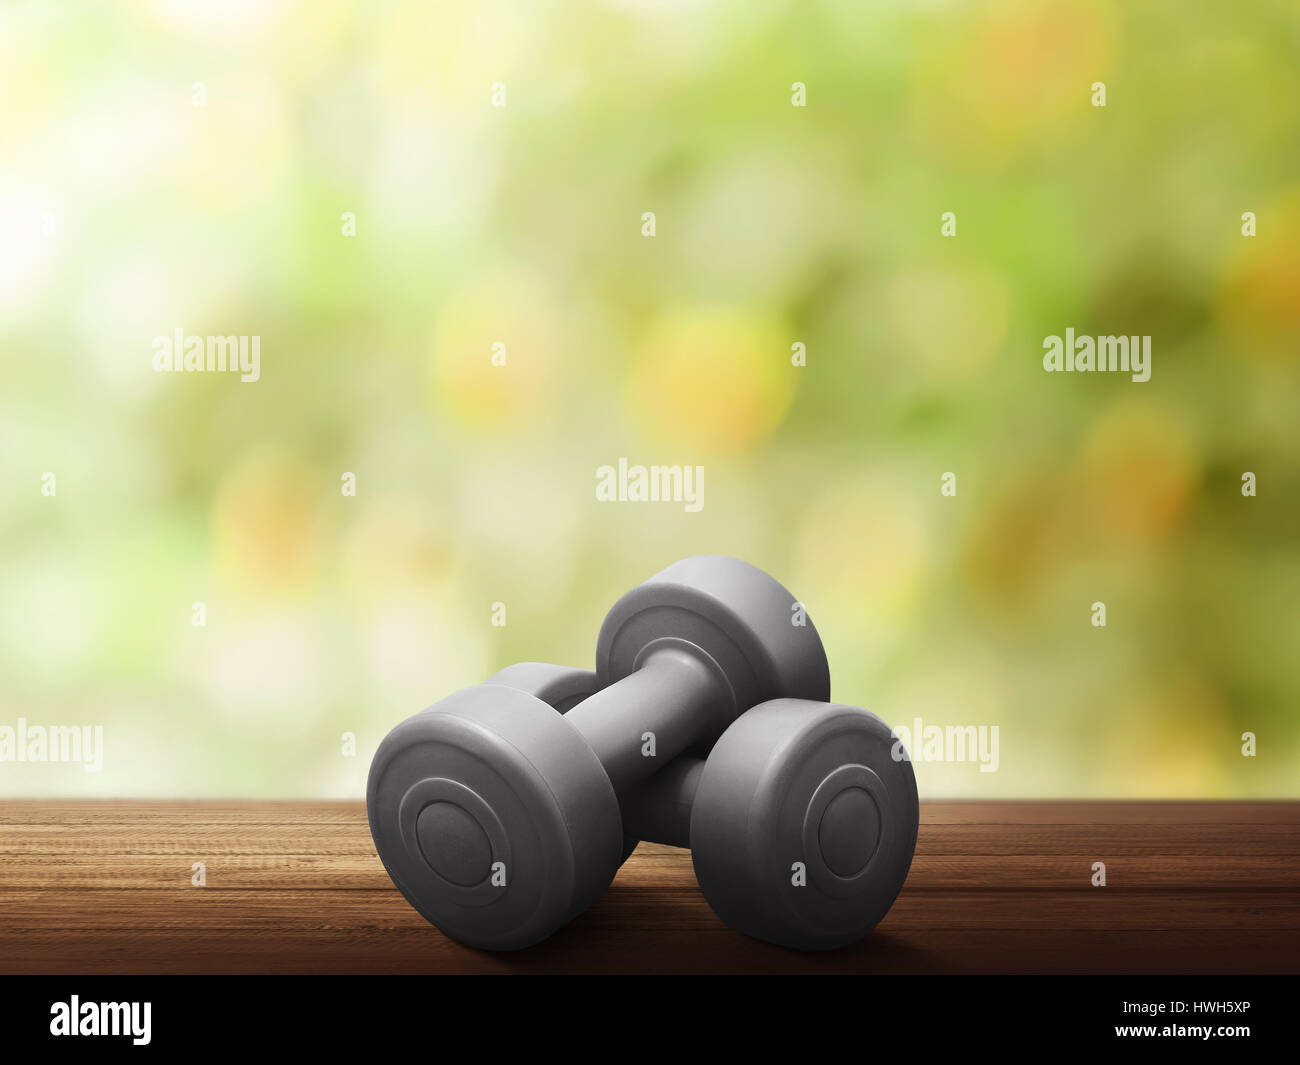 Red dumbbells for weight training on wooden table Stock Photo